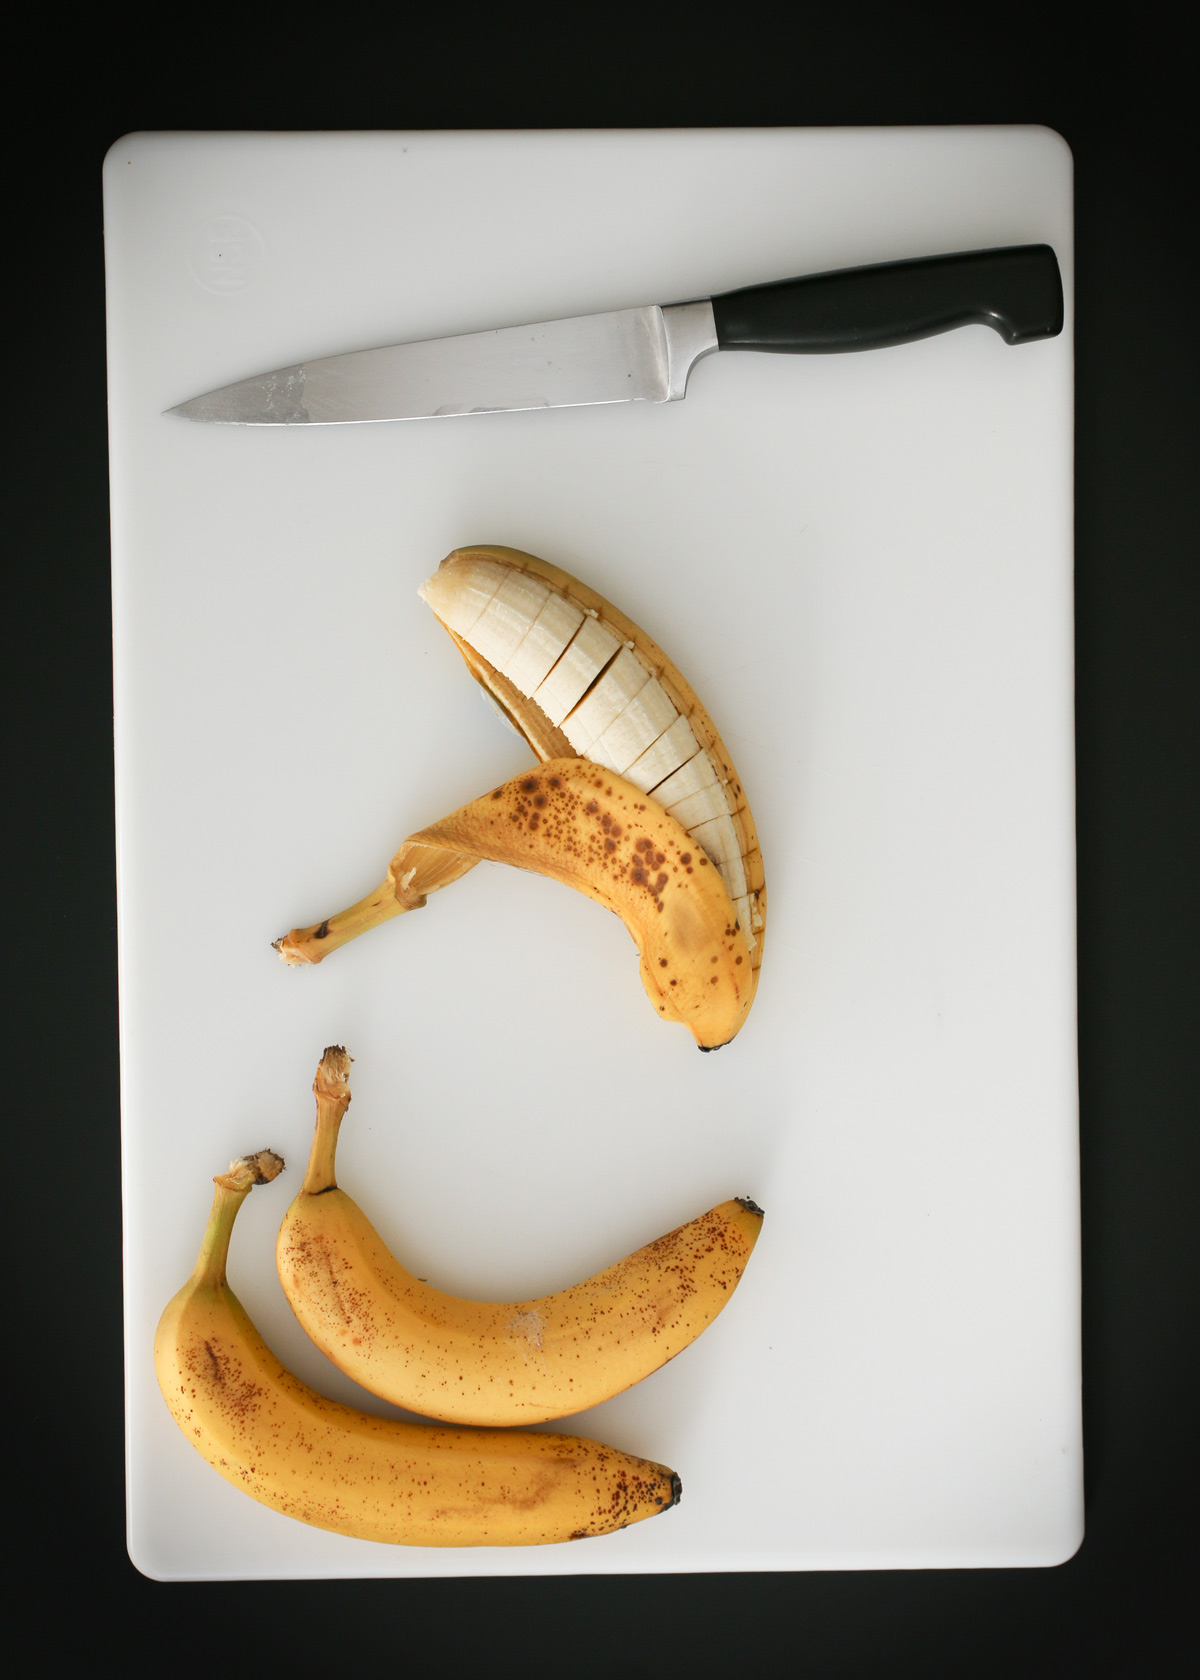 slicing bananas on cutting board with a chef's knife.